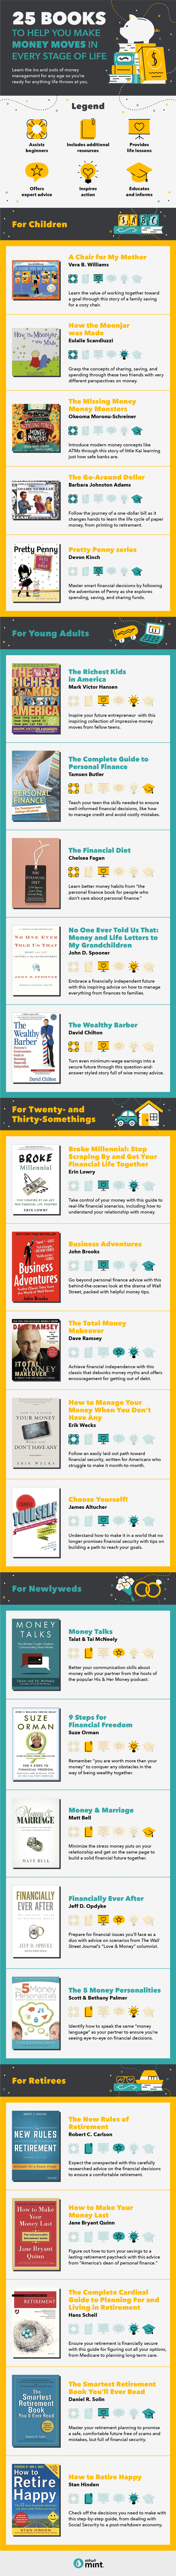 best books to help you make money